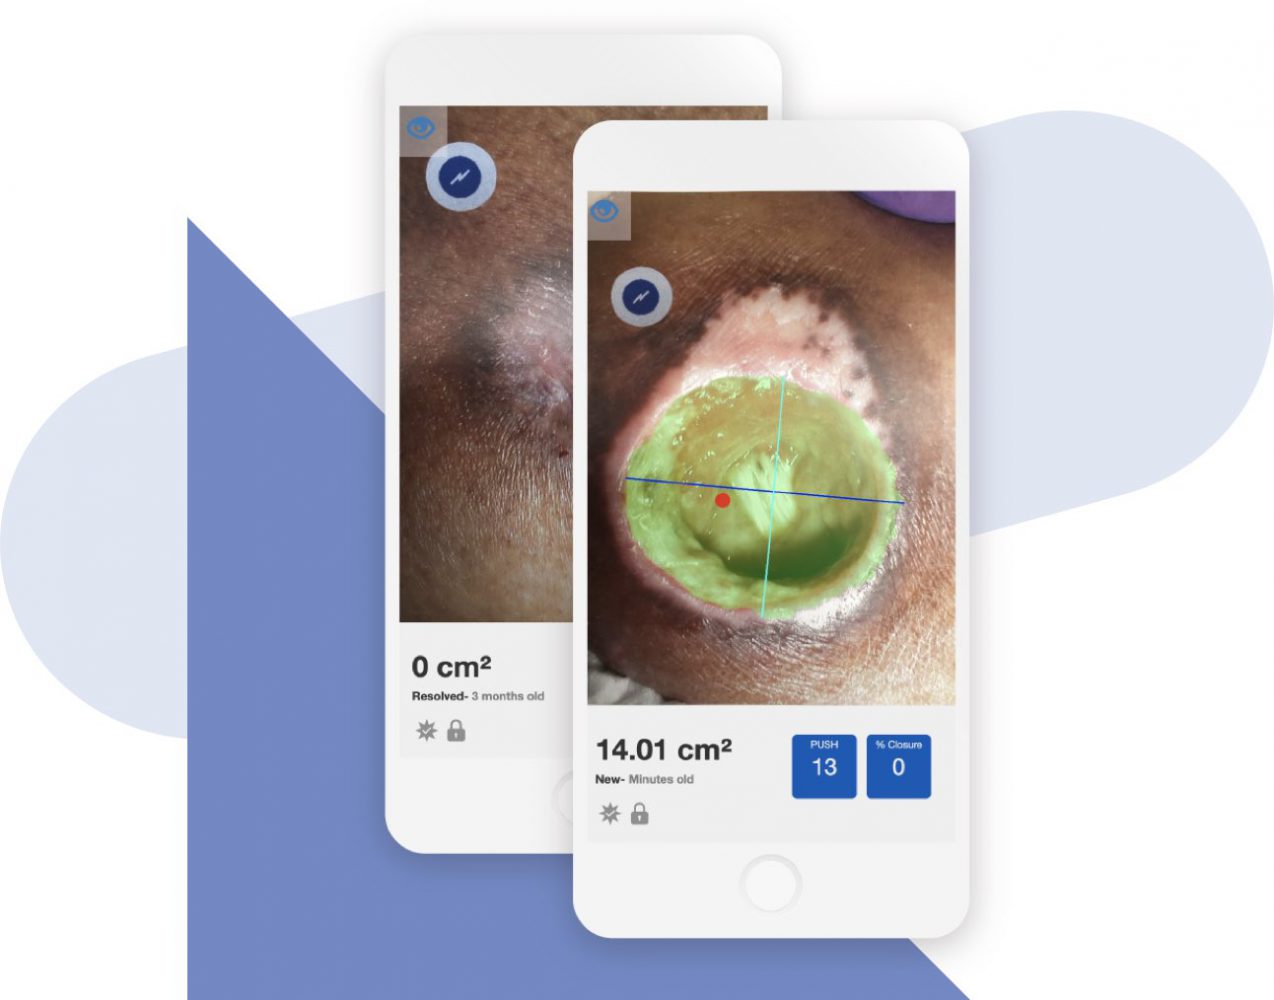 Swift Skin and Wound app measuring a wound size